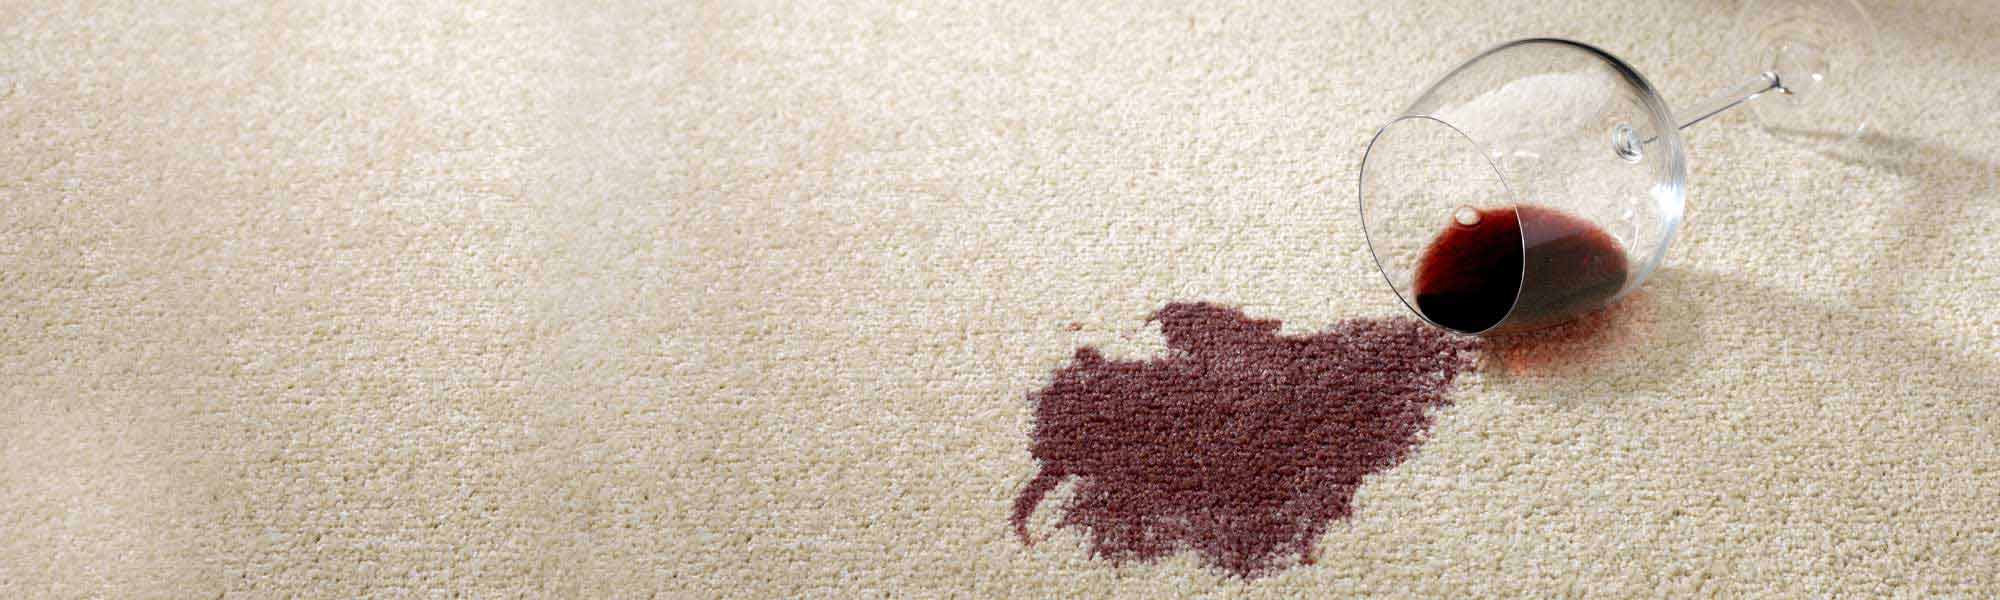 Professional Stain Removal Service by Kill Devil Hills Chem-Dry